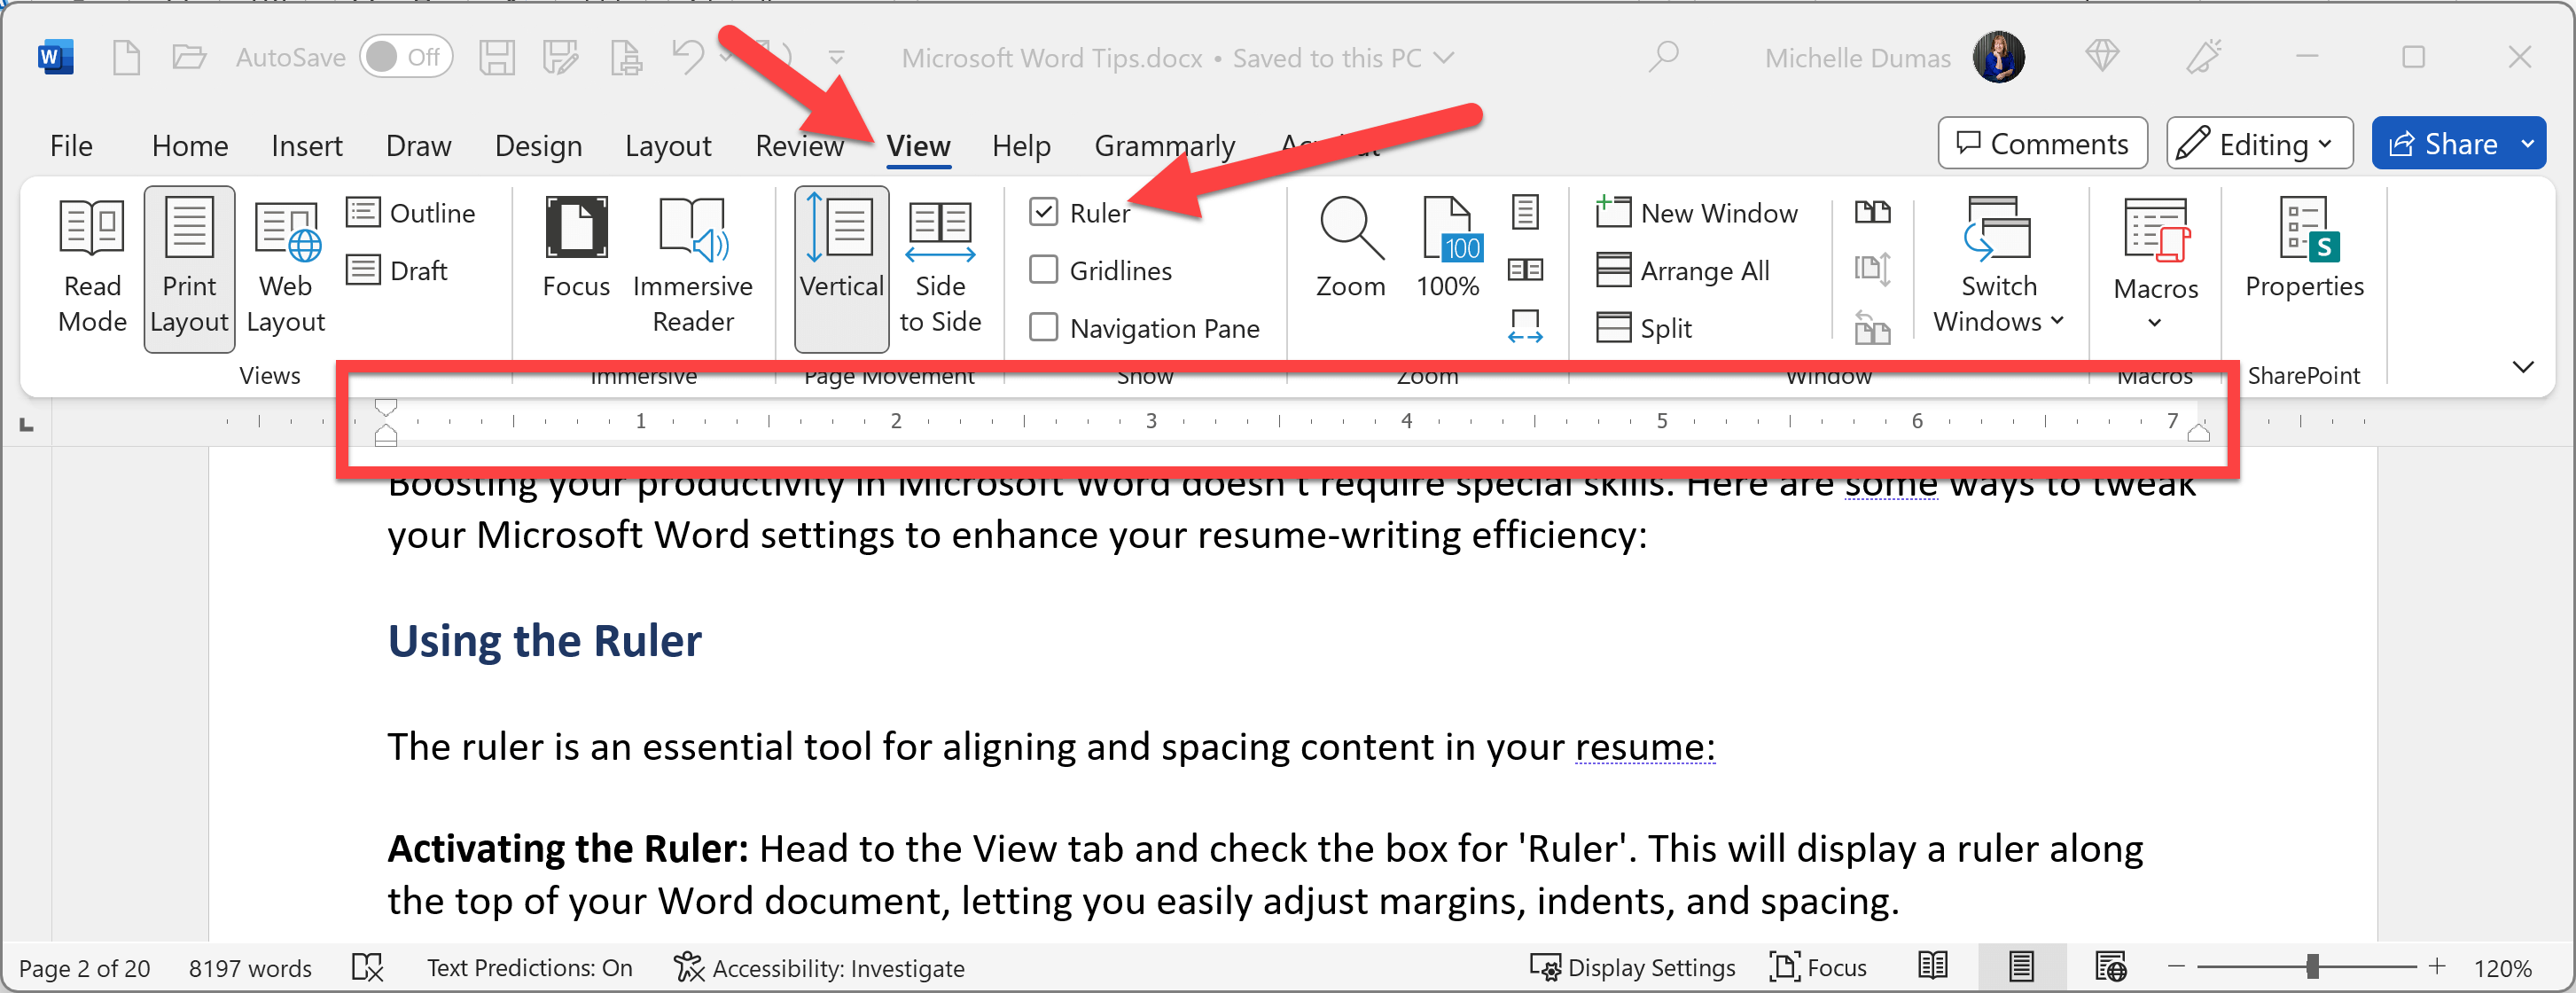 How To Turn on the Ruler in MS Word